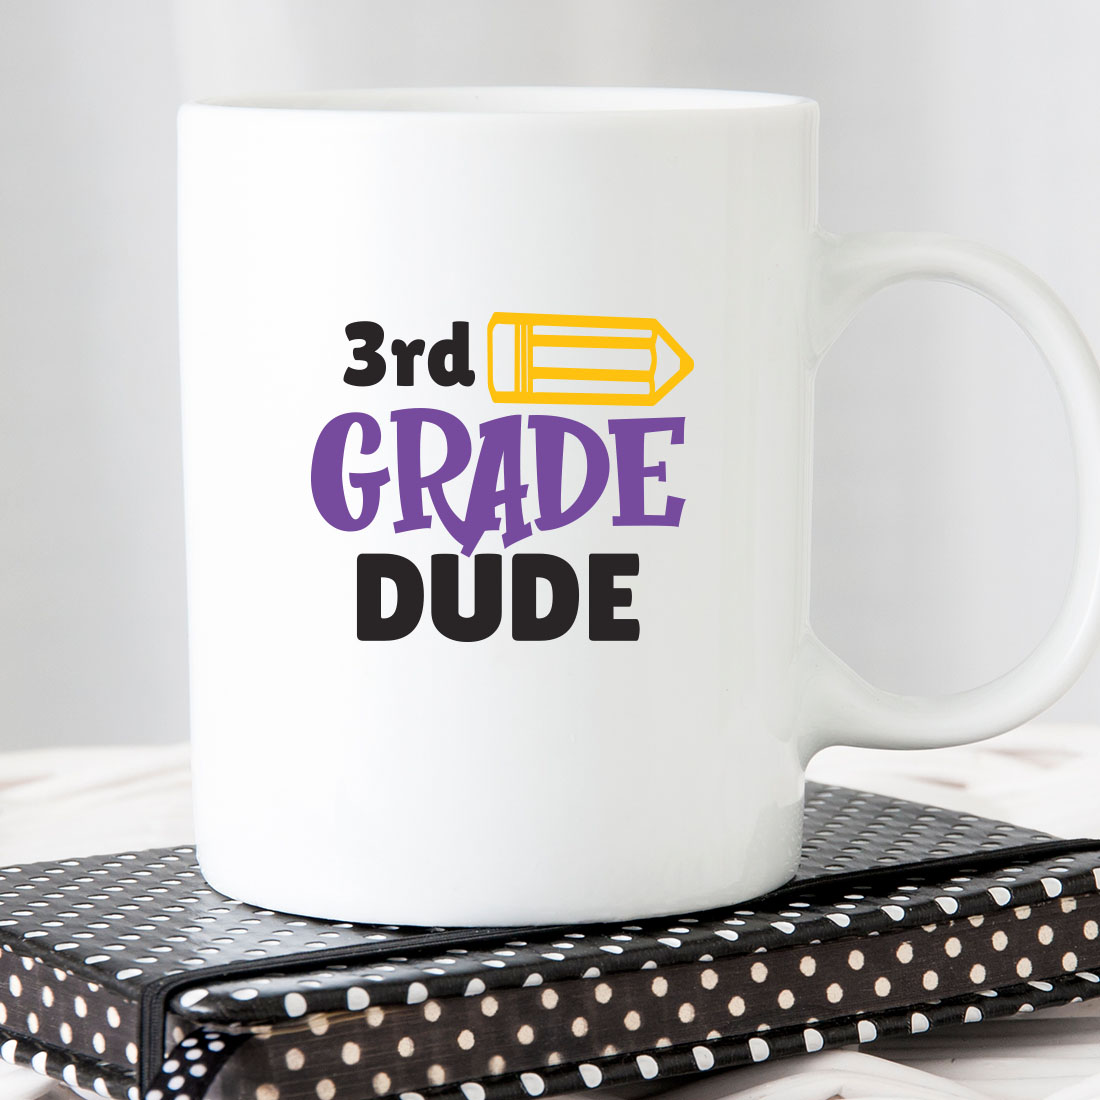 White coffee mug with the words 3rd grade dude on it.